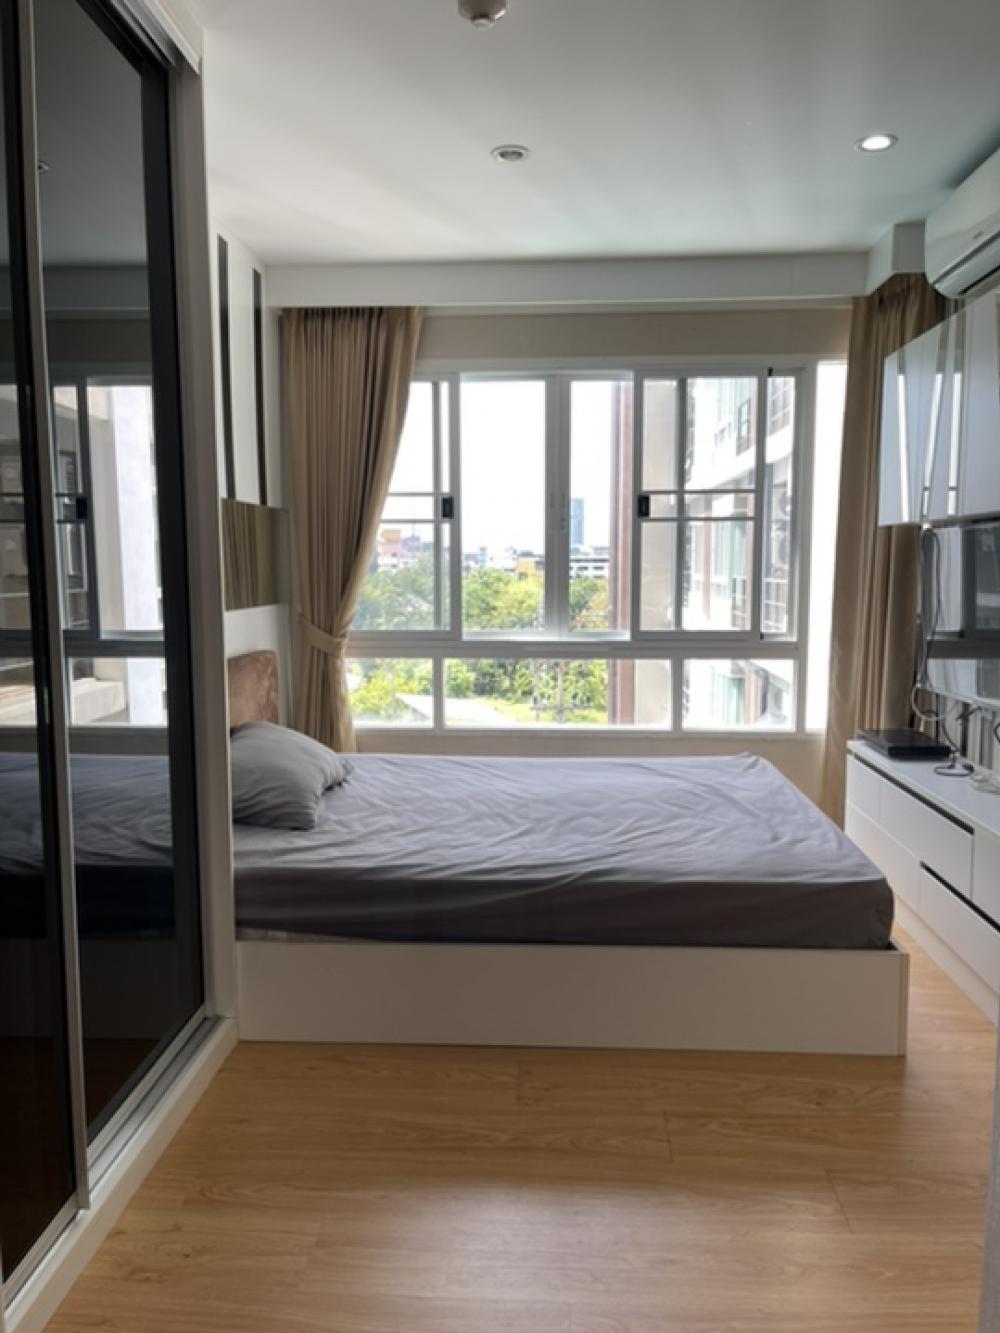 For RentCondoHatyai Songkhla : For rent, Plus Condo 1, Hat Yai, alley next to Big C Extra, 2 bedrooms, 2 bathrooms, area 60 sq m, 5th floor, Building B, complete amenities. Ready to move in